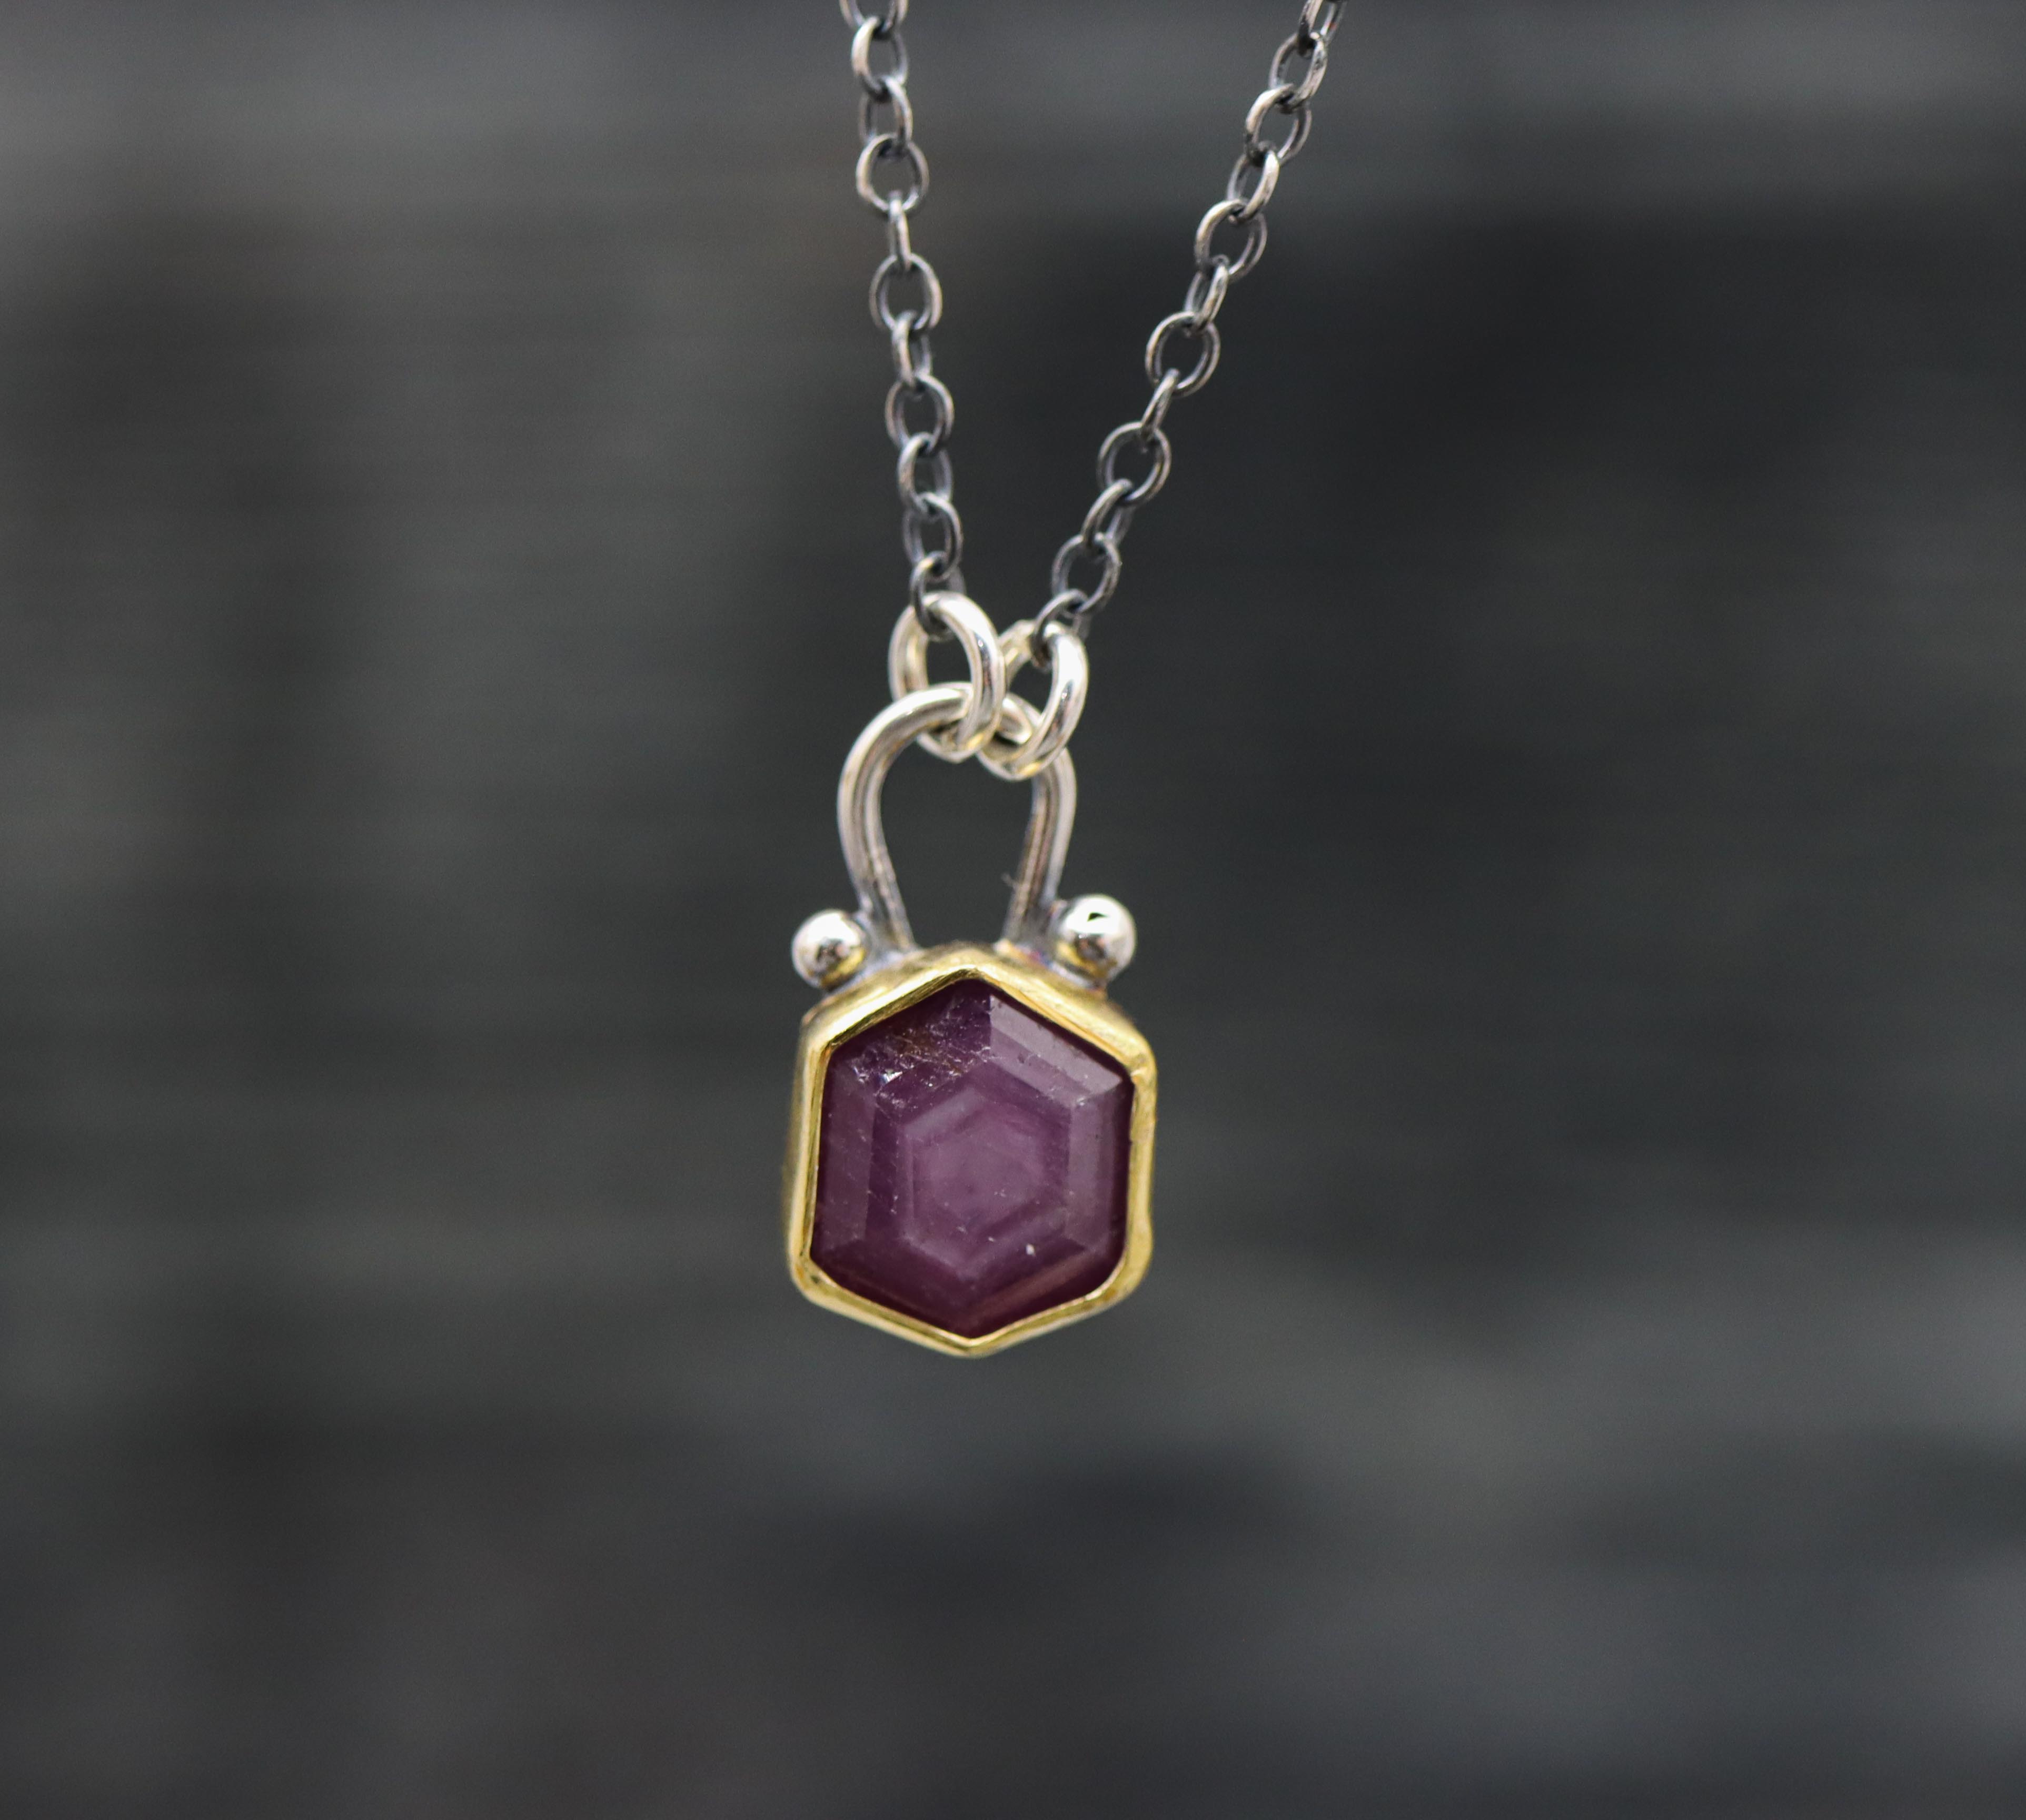 Ruby Pendant Necklace Sterling Silver and 22k Gold